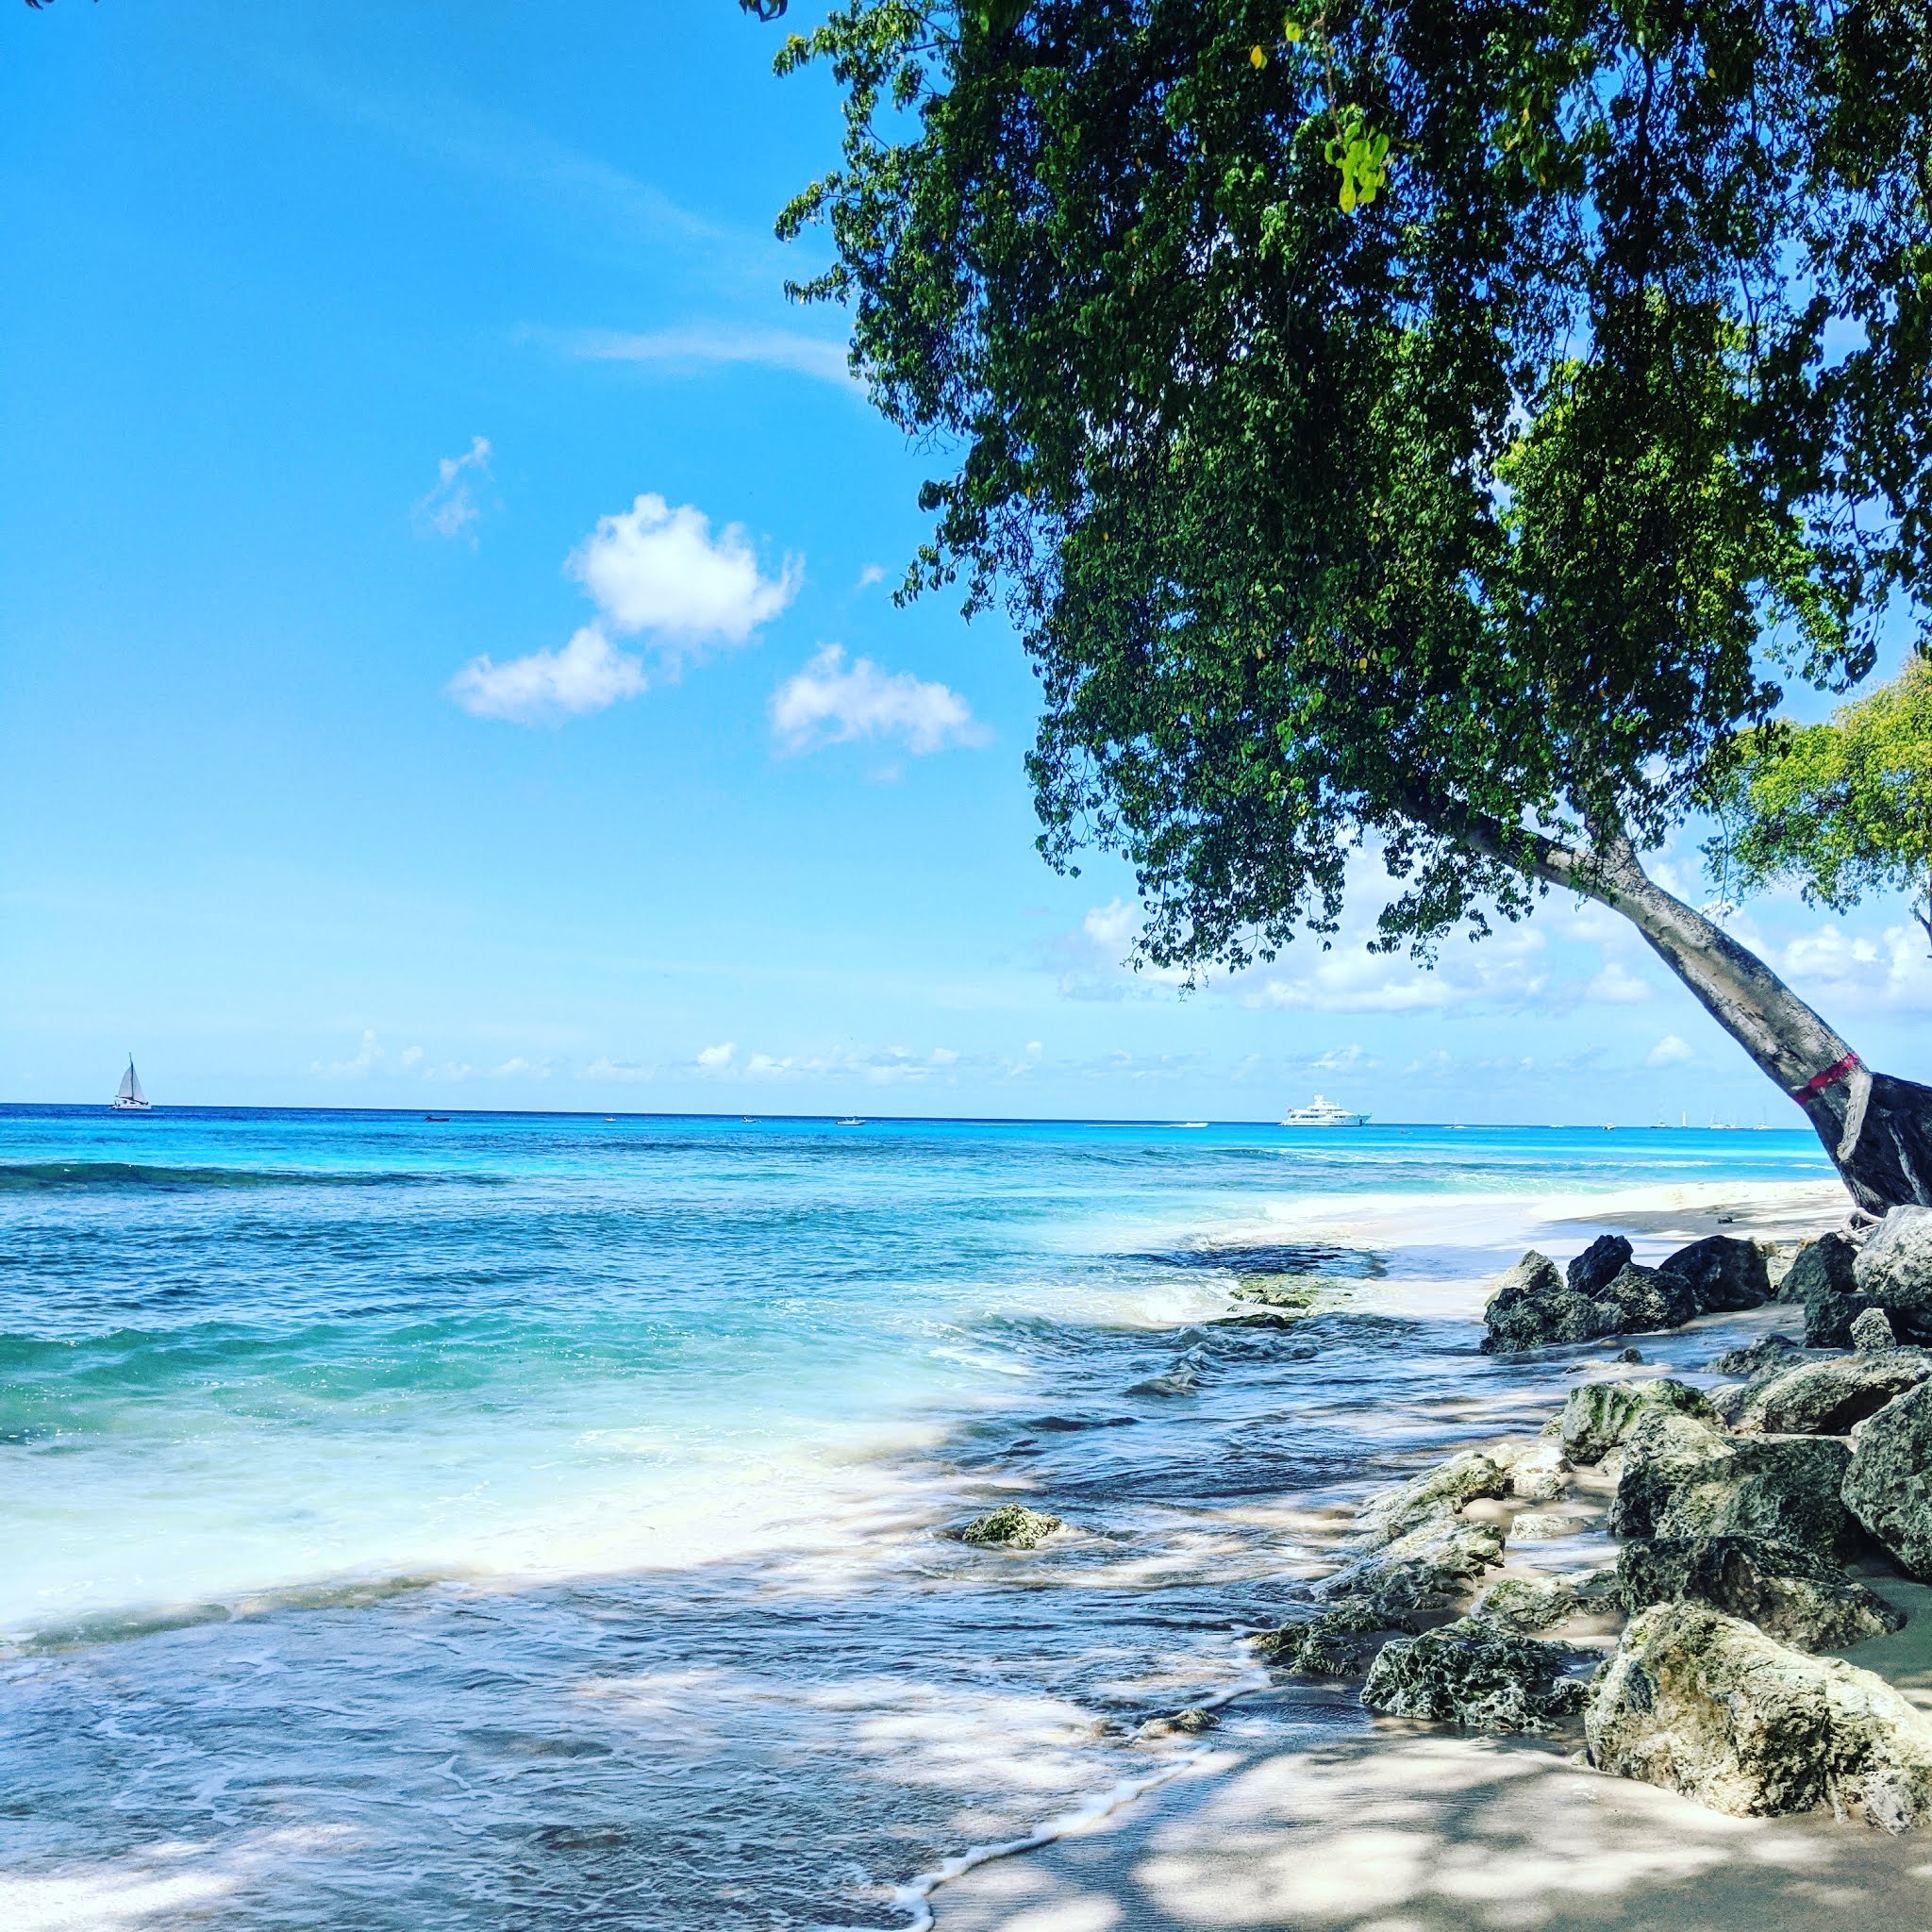 An image of the shoreline with trees on the beach surrounded by bright blue water and a little boat in the distance at paynes bay in Barbados